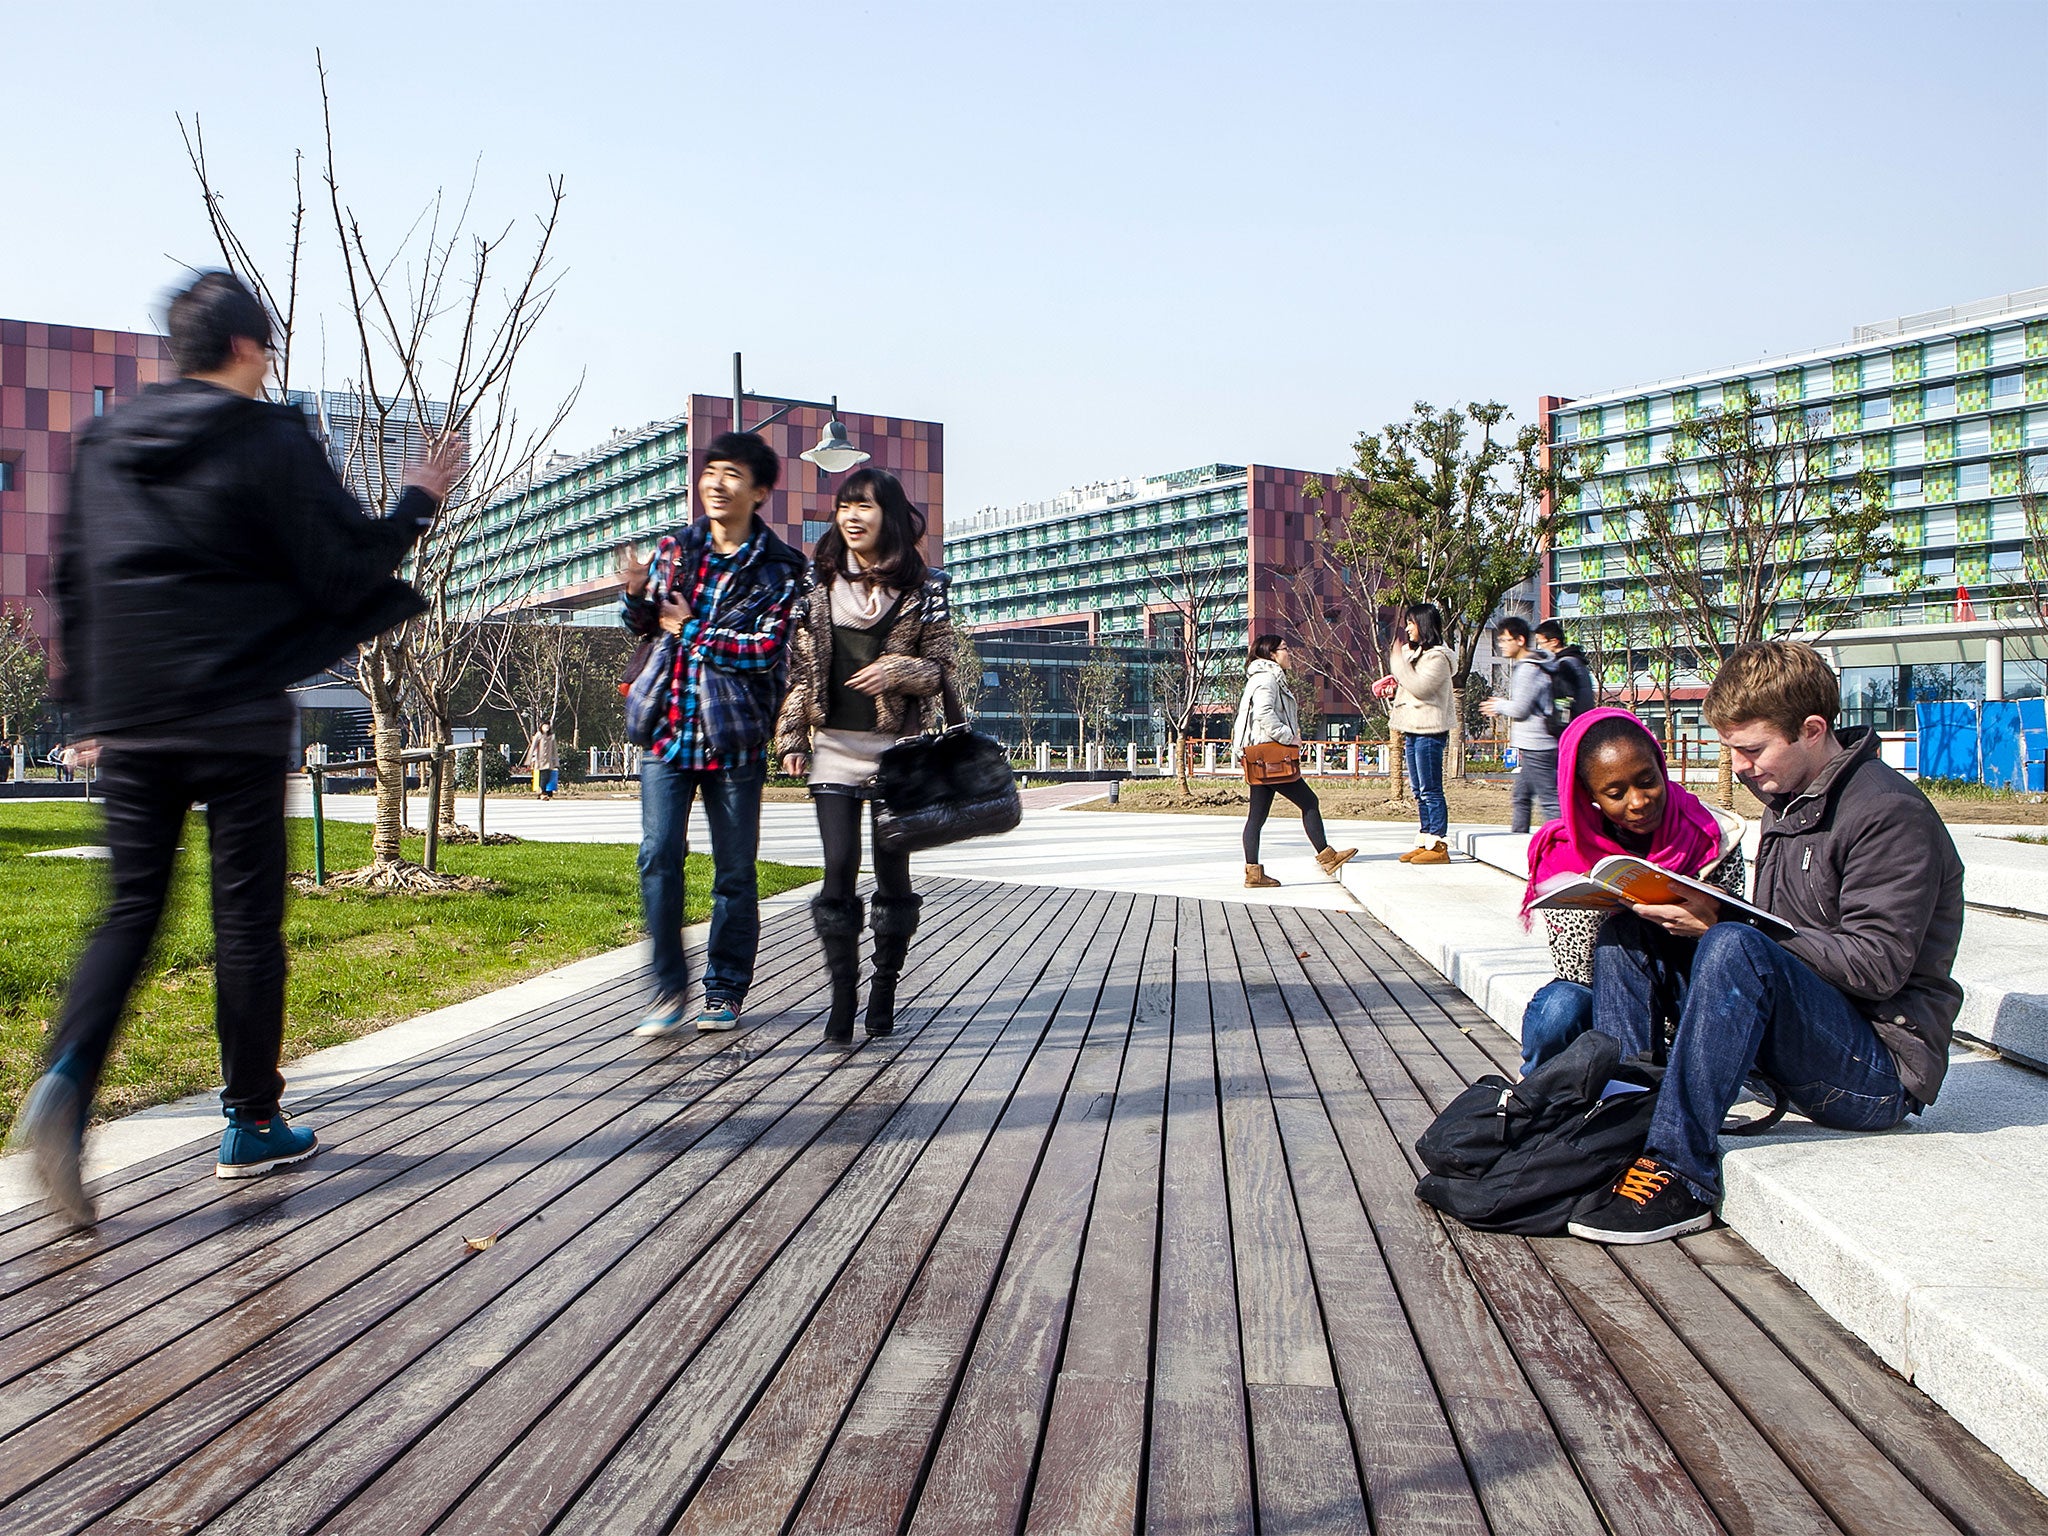 Liverpool's Xi'an Jiaotong campus, set up as part of a partnership between the two universities 10 years ago, hosts year-long programs for students to study in China